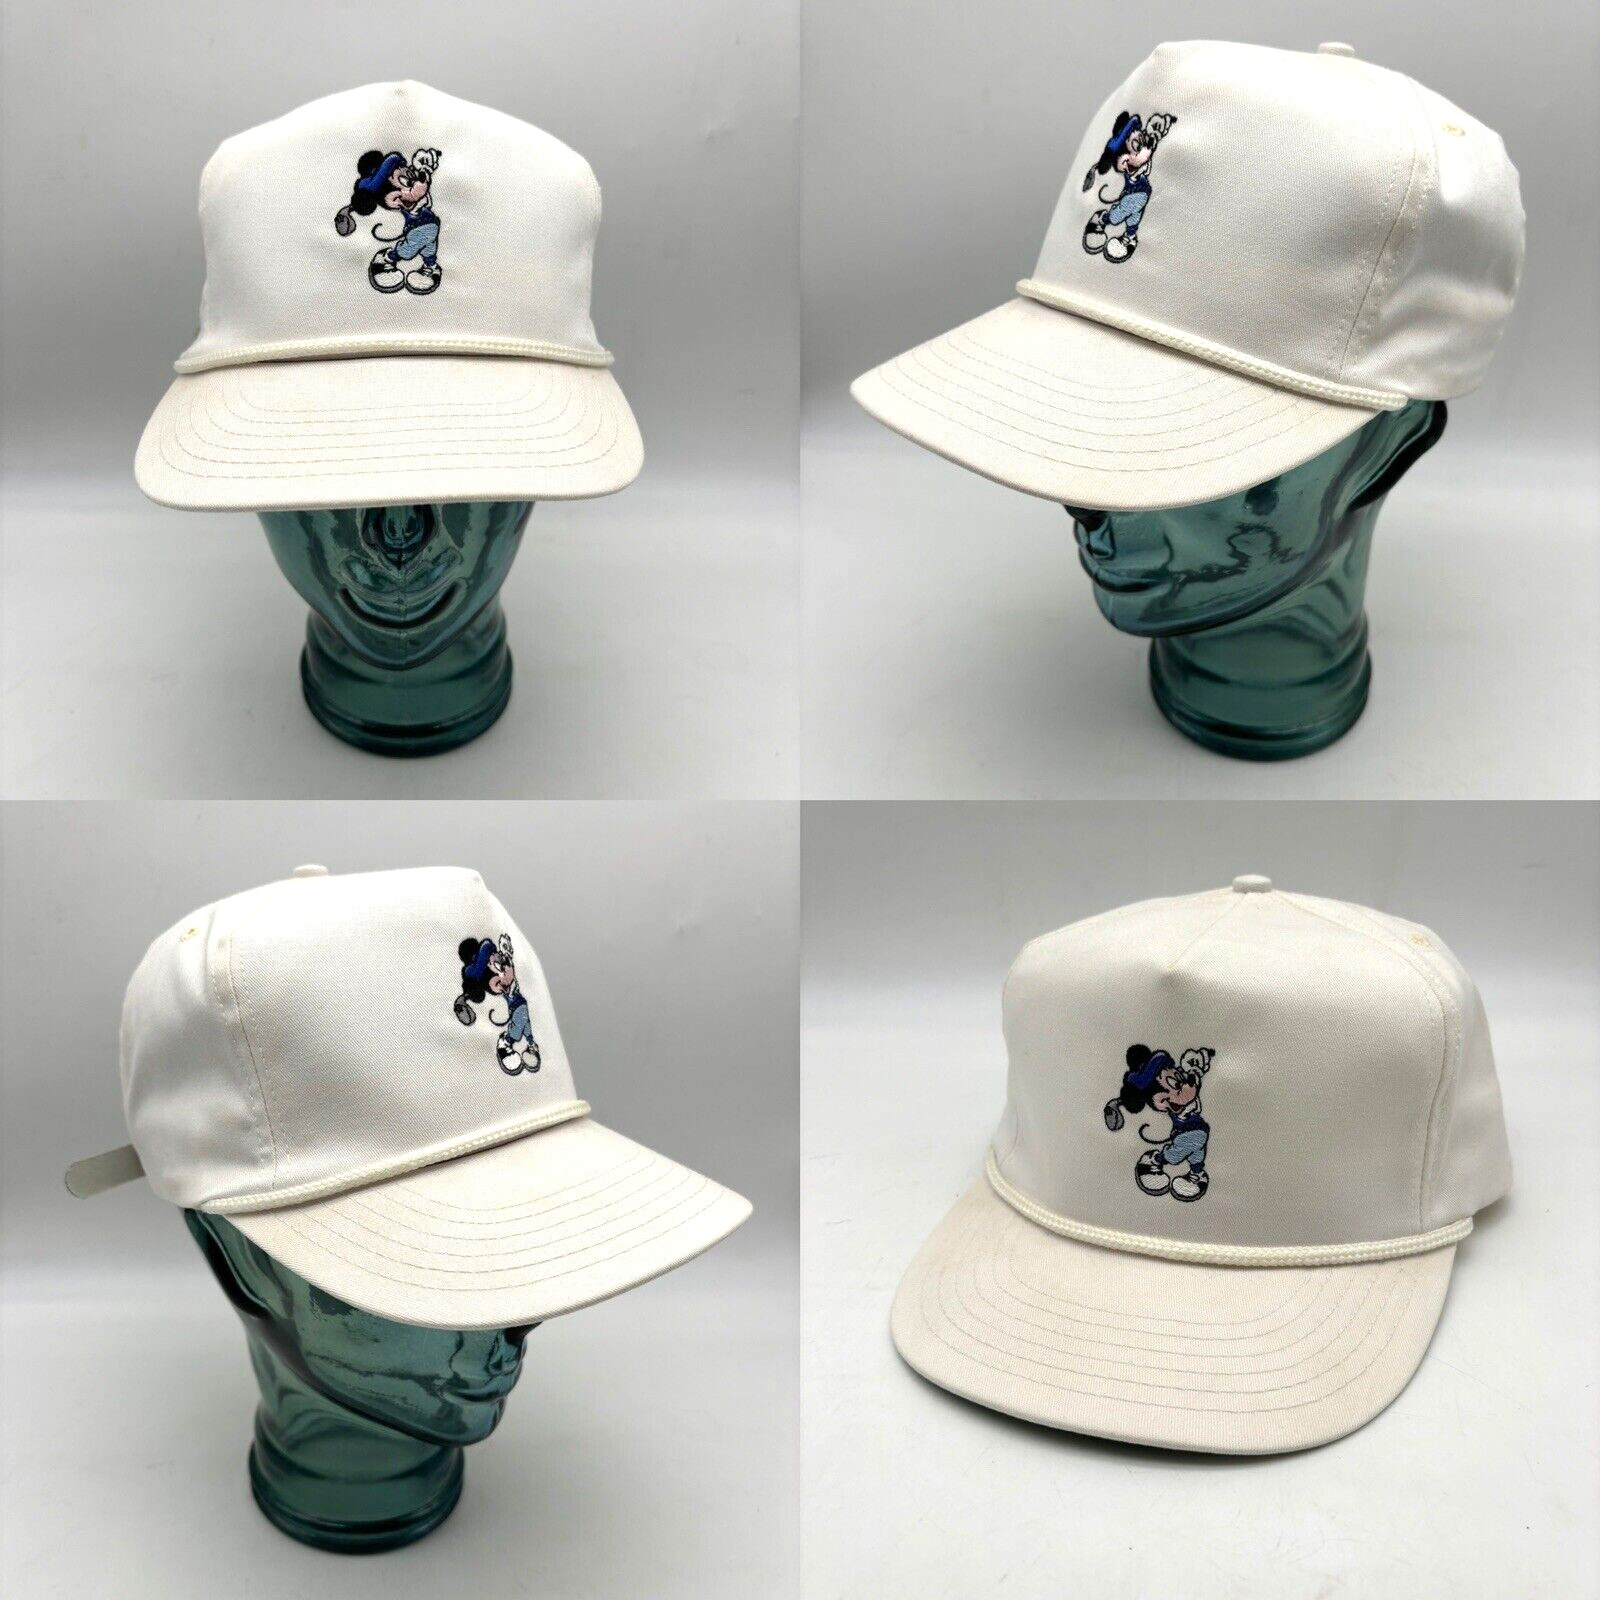 Vintage 90s Disney Pro Collection Mickey Mouse Embroidered Adjustable Golf Hat